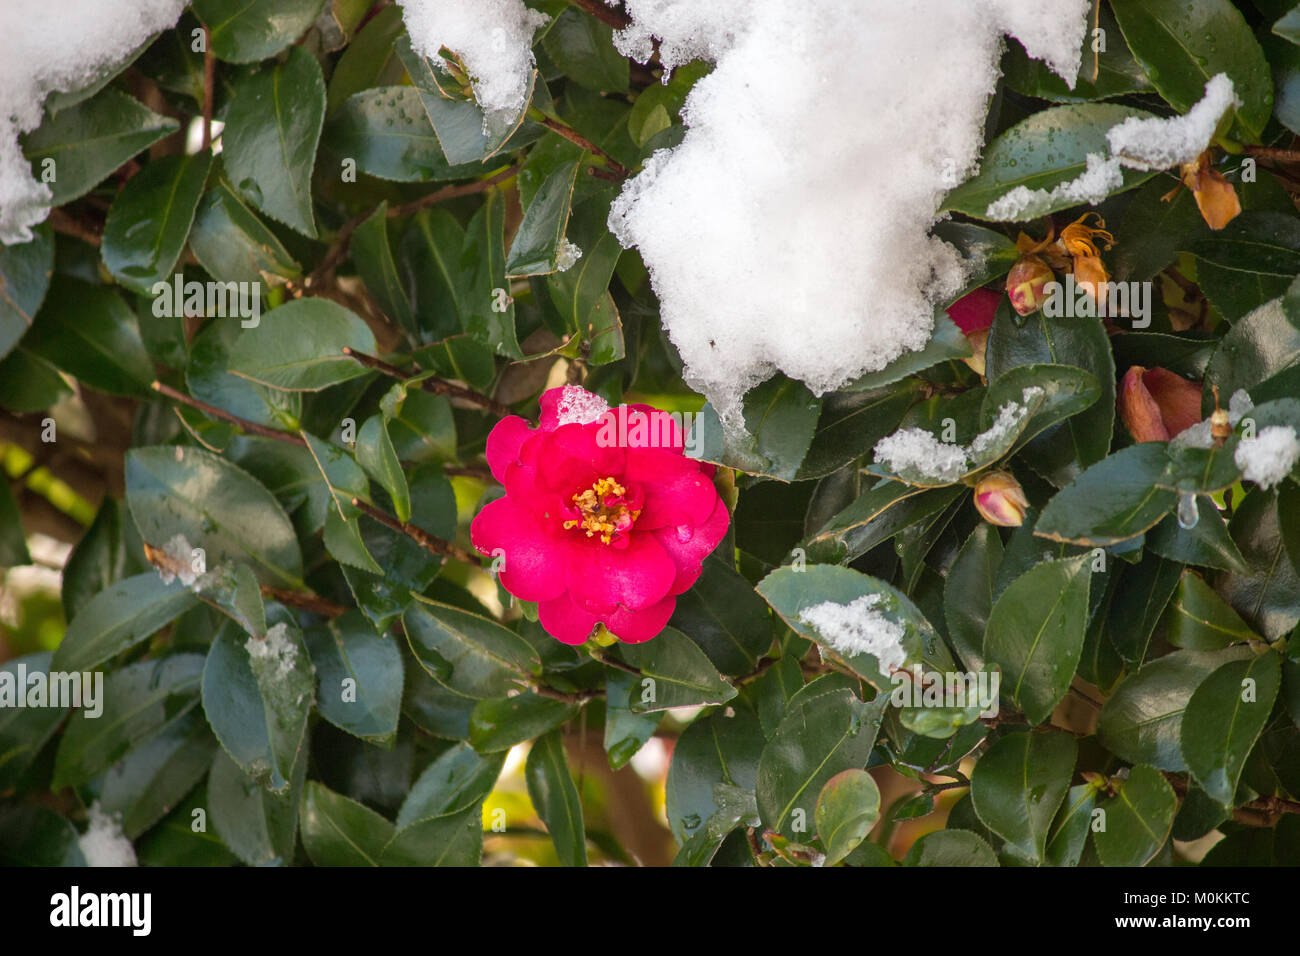 23 January 2018, Japan 2 A Pink Camellia Sasanqua is blooming after the snowy night Stock Photo